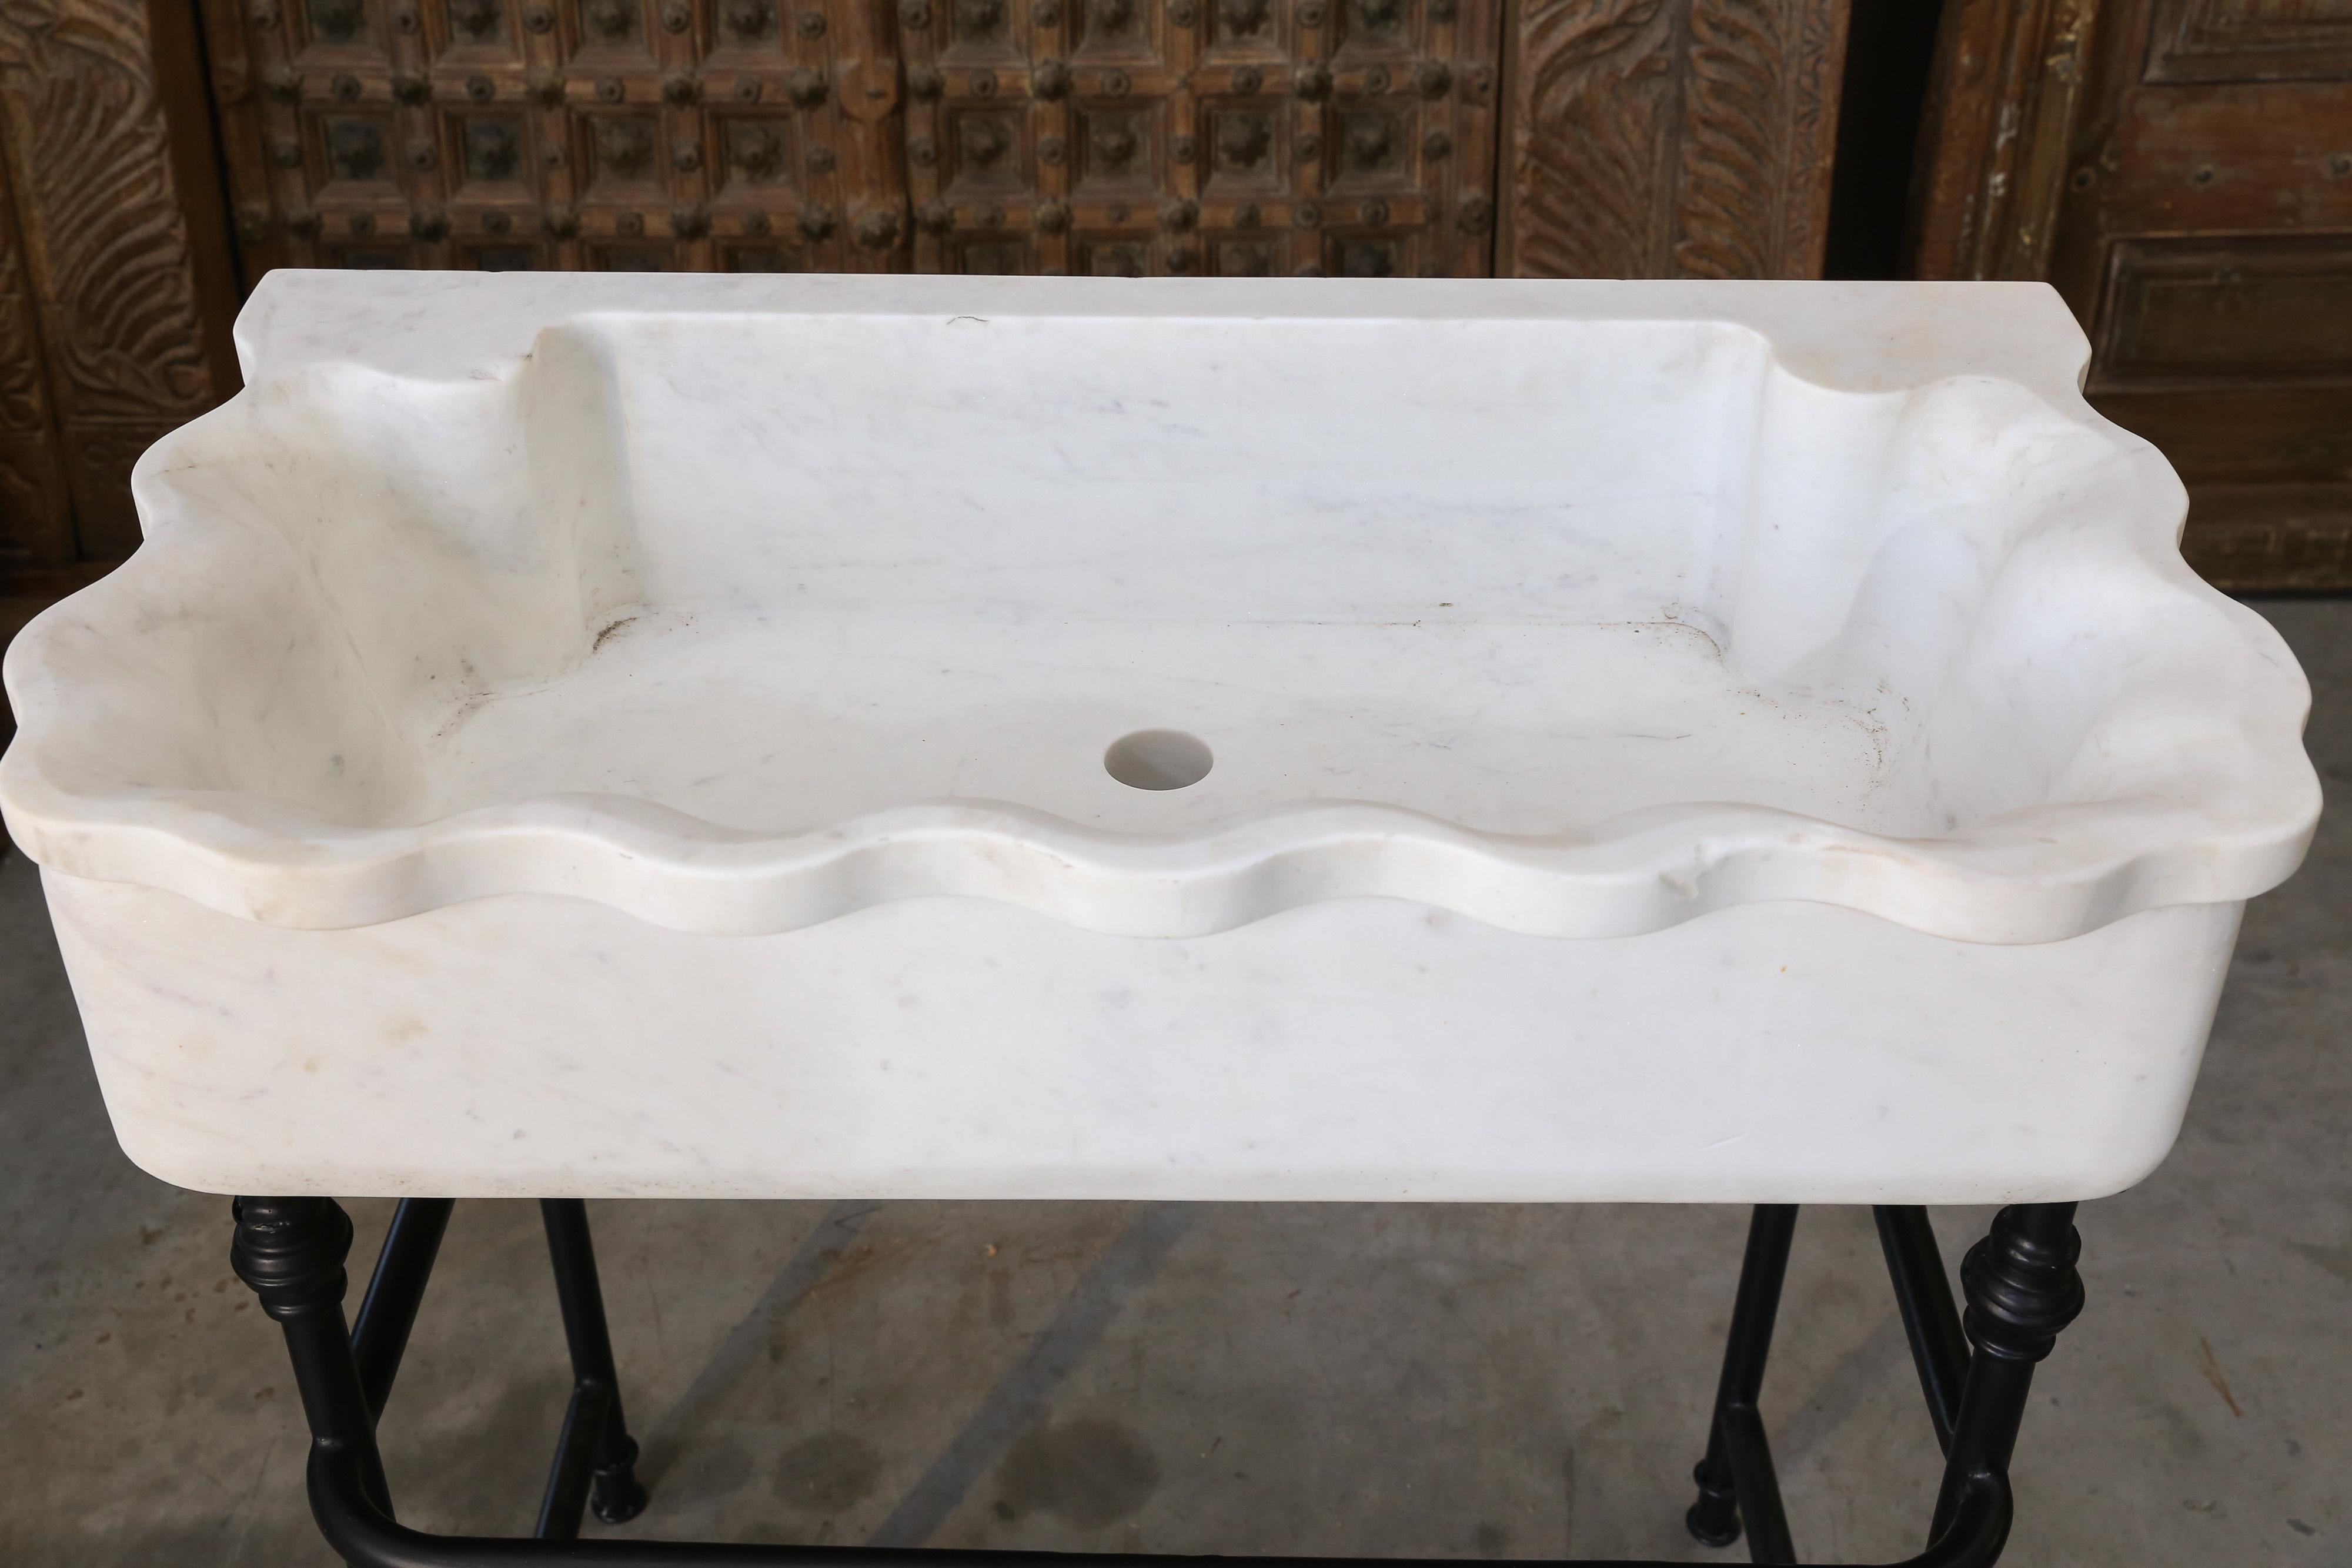 Marble sinks on iron stands were used in the open backyard of colonial homes.
The large marble sink is hand carved from one block of large fine quality marble slab. The support is made of iron and has a towel rack. It is solid and will last several